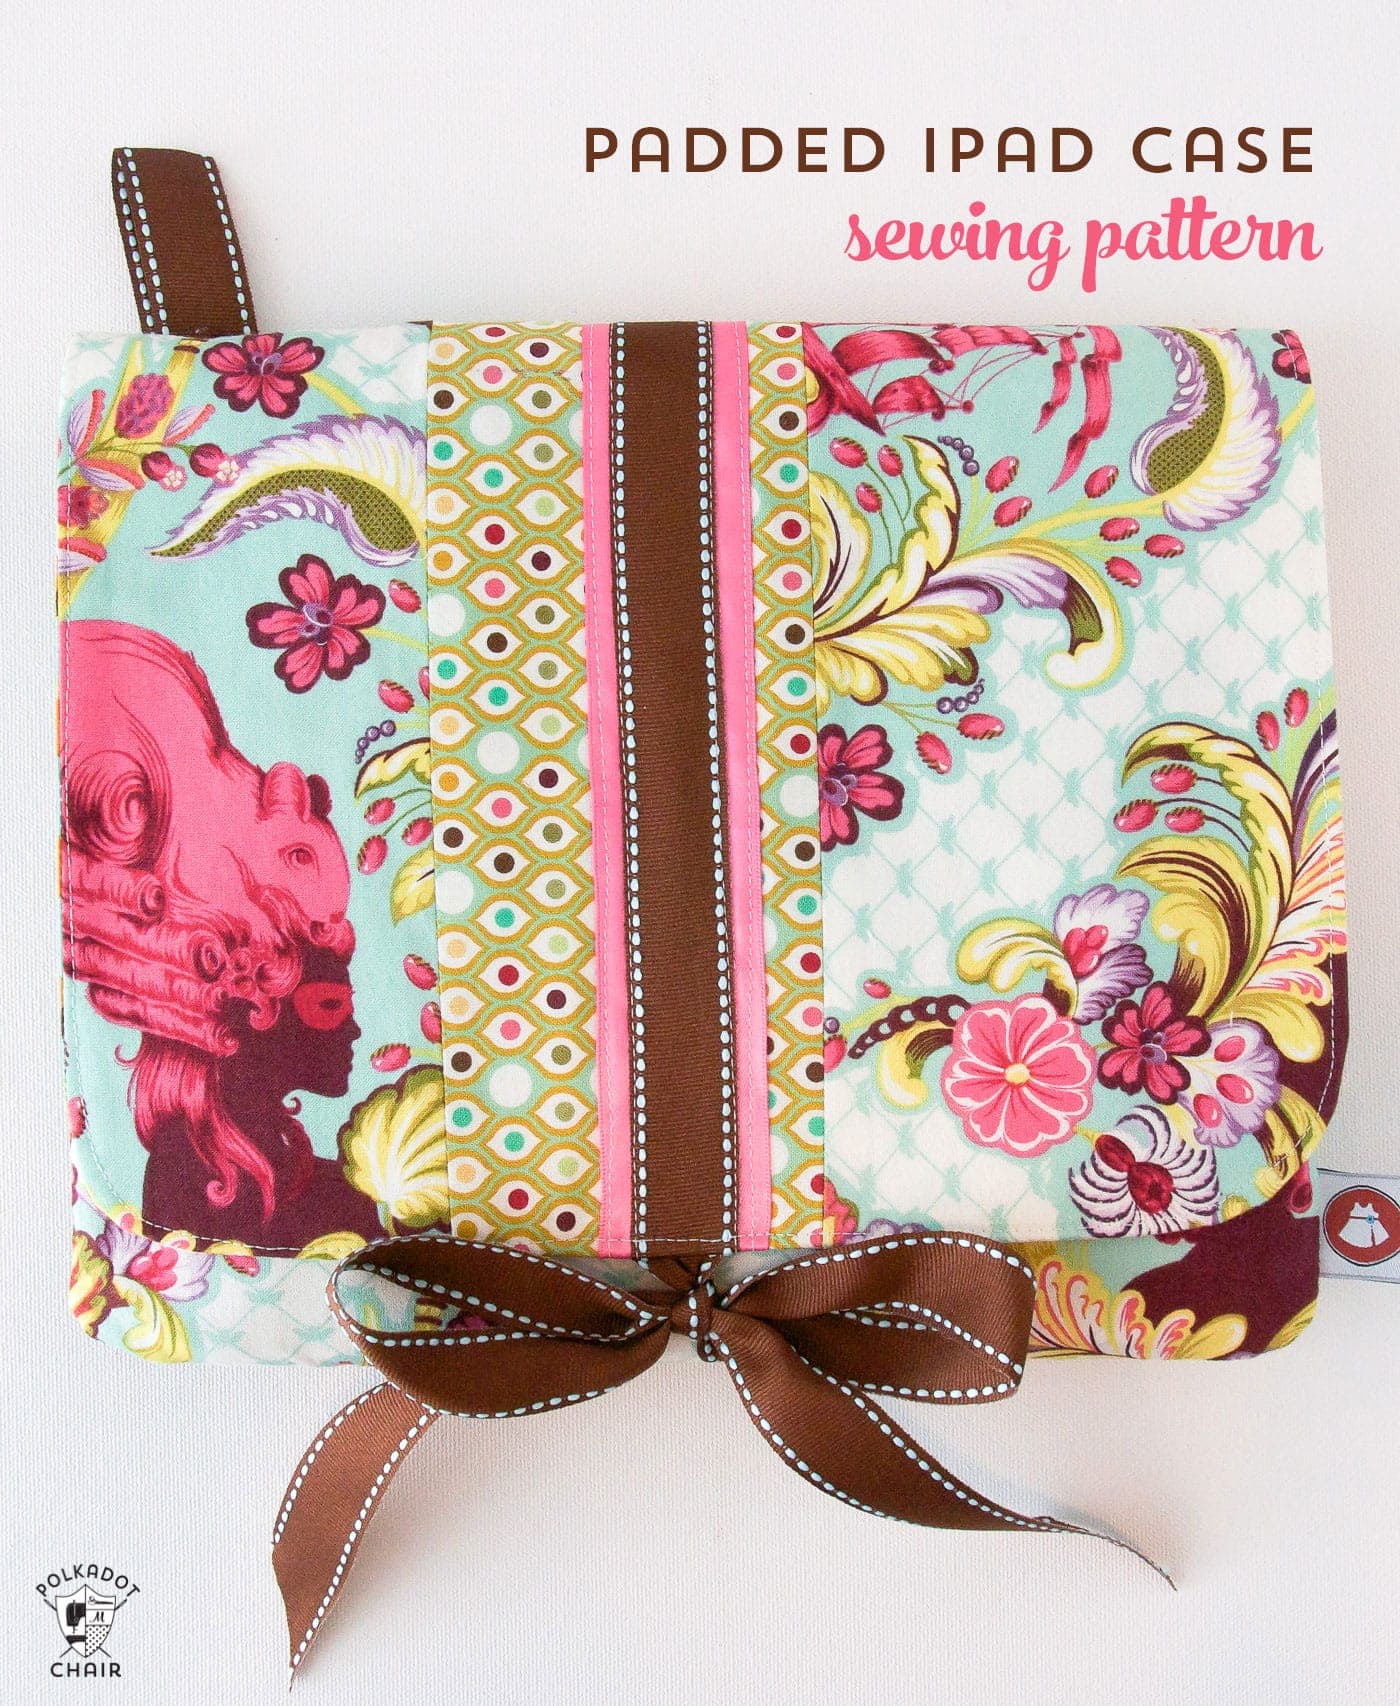 Tutorial for a padded ipad or tablet case. A free ipad case sewing pattern available on polkadotchair.com